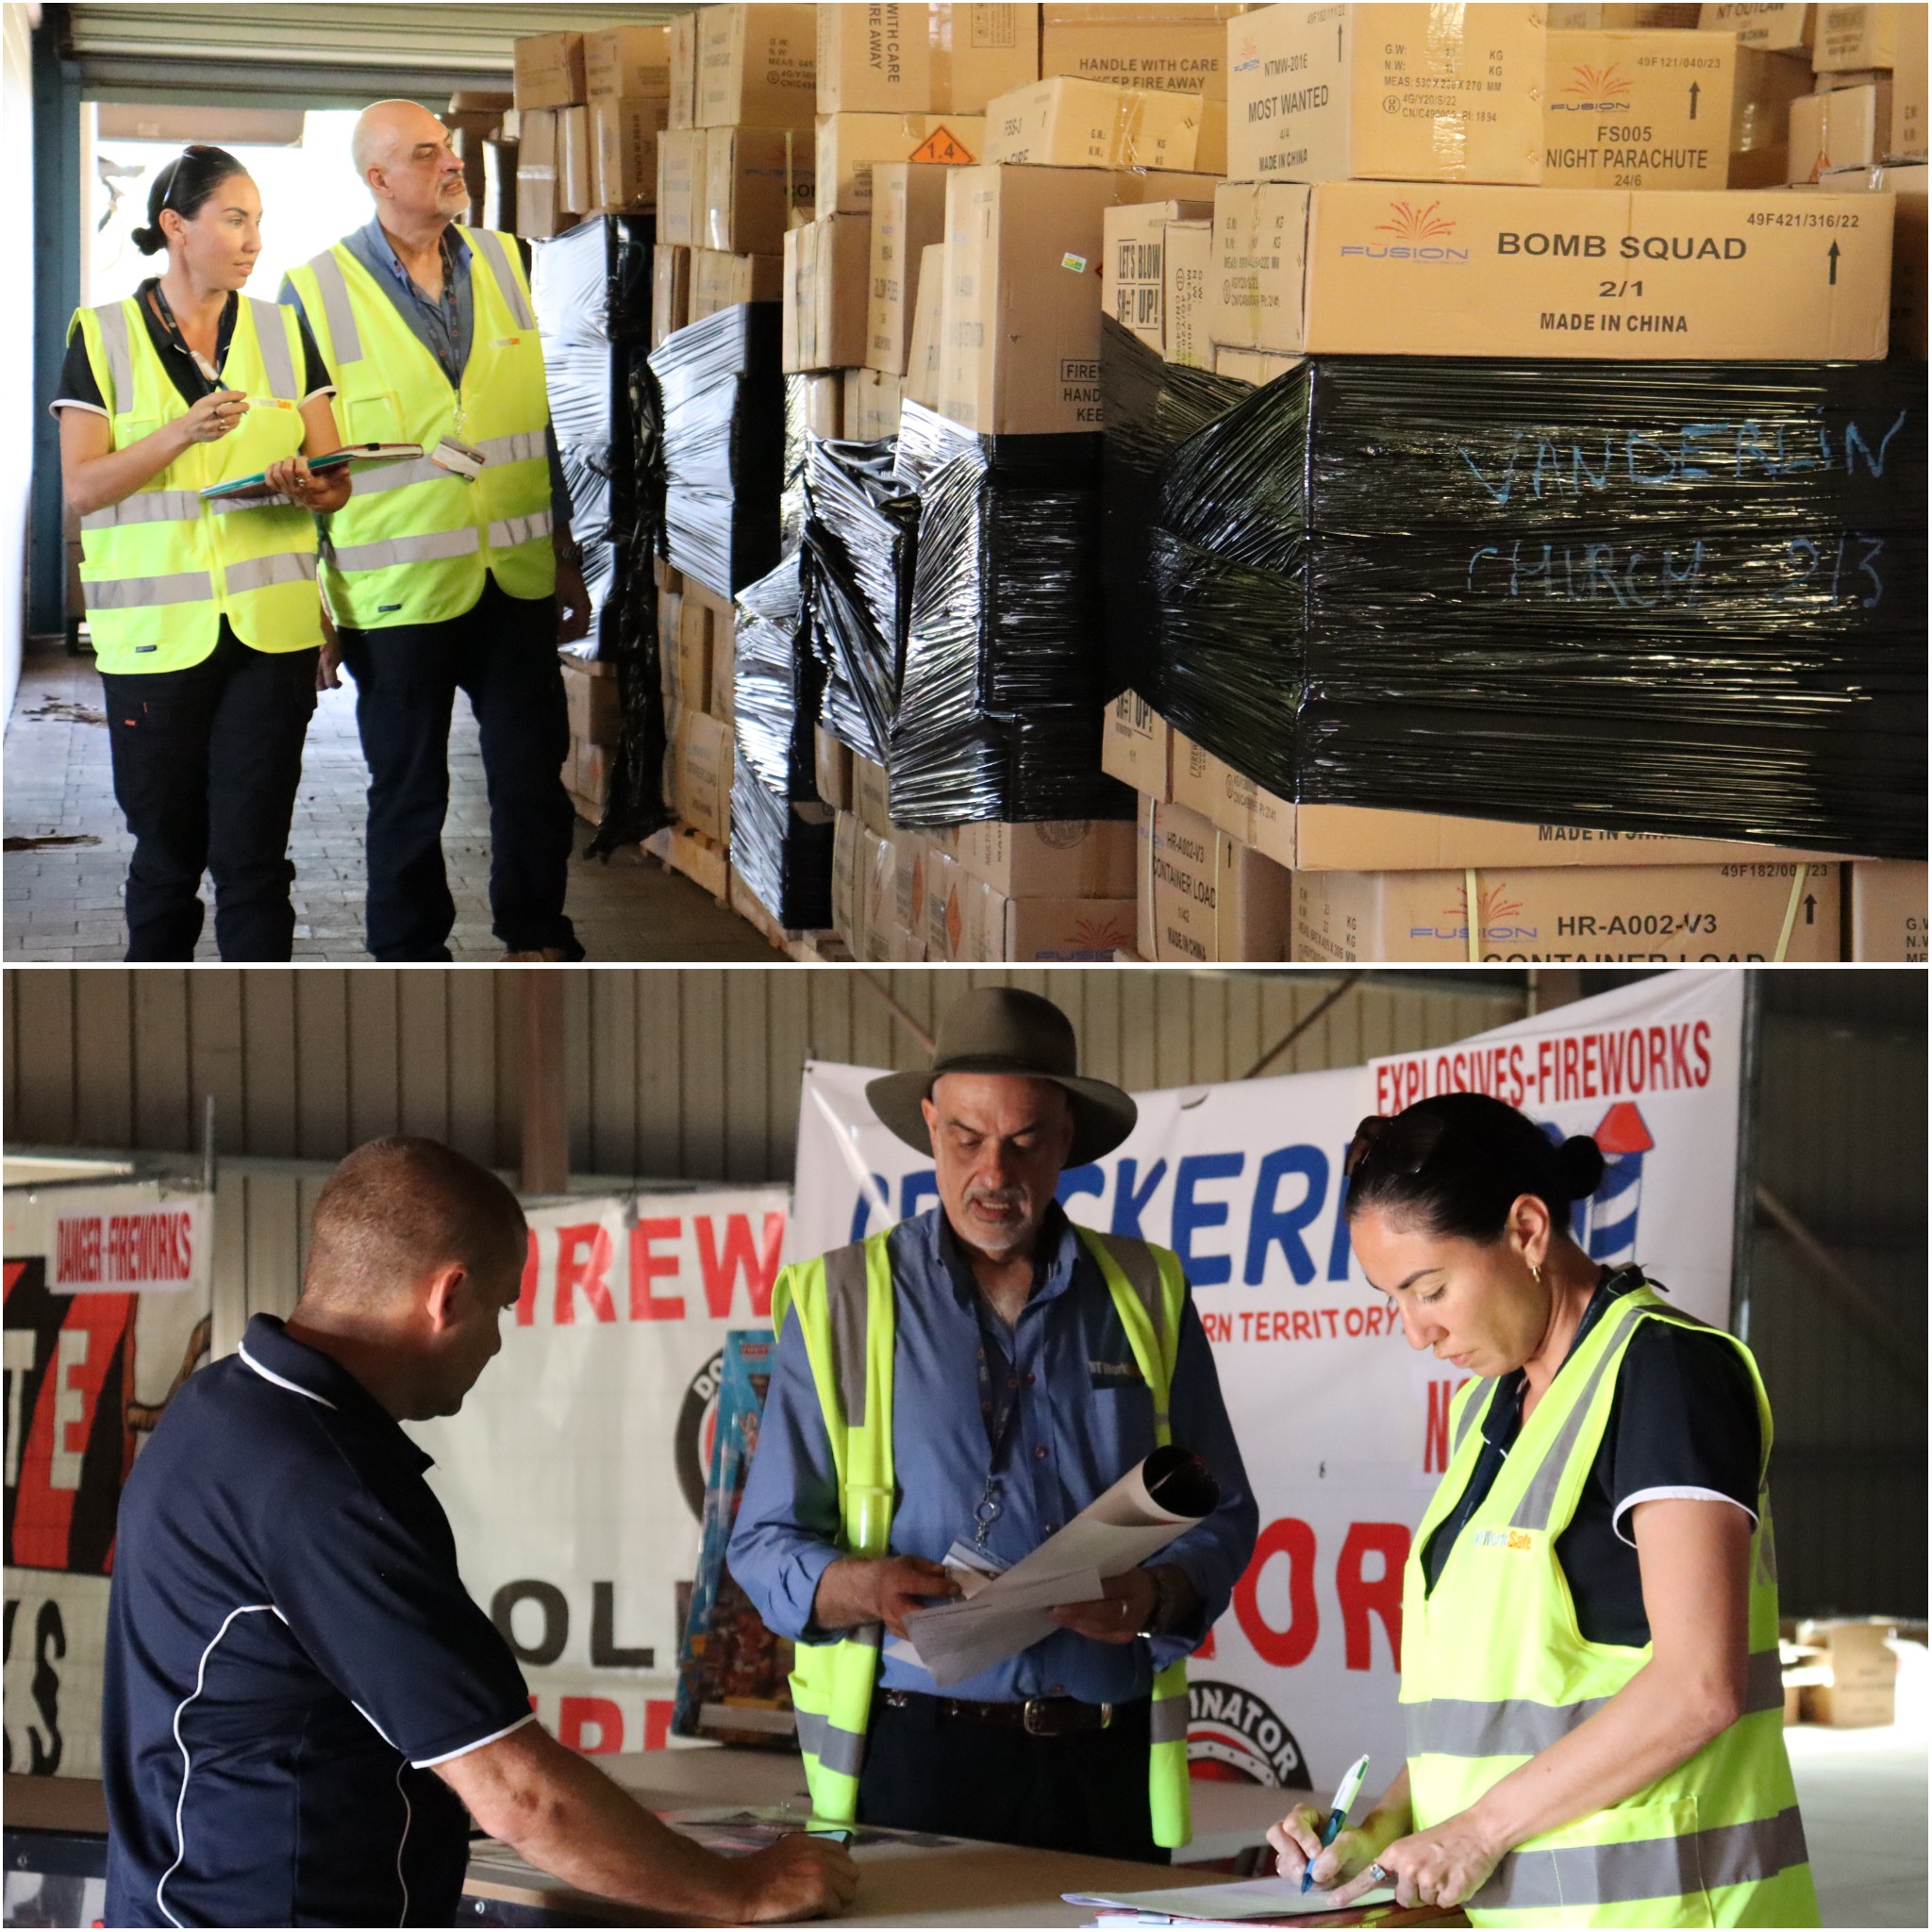 The image shows NT WorkSafe inspectors conducting inspections on a fireworks wholesaler.